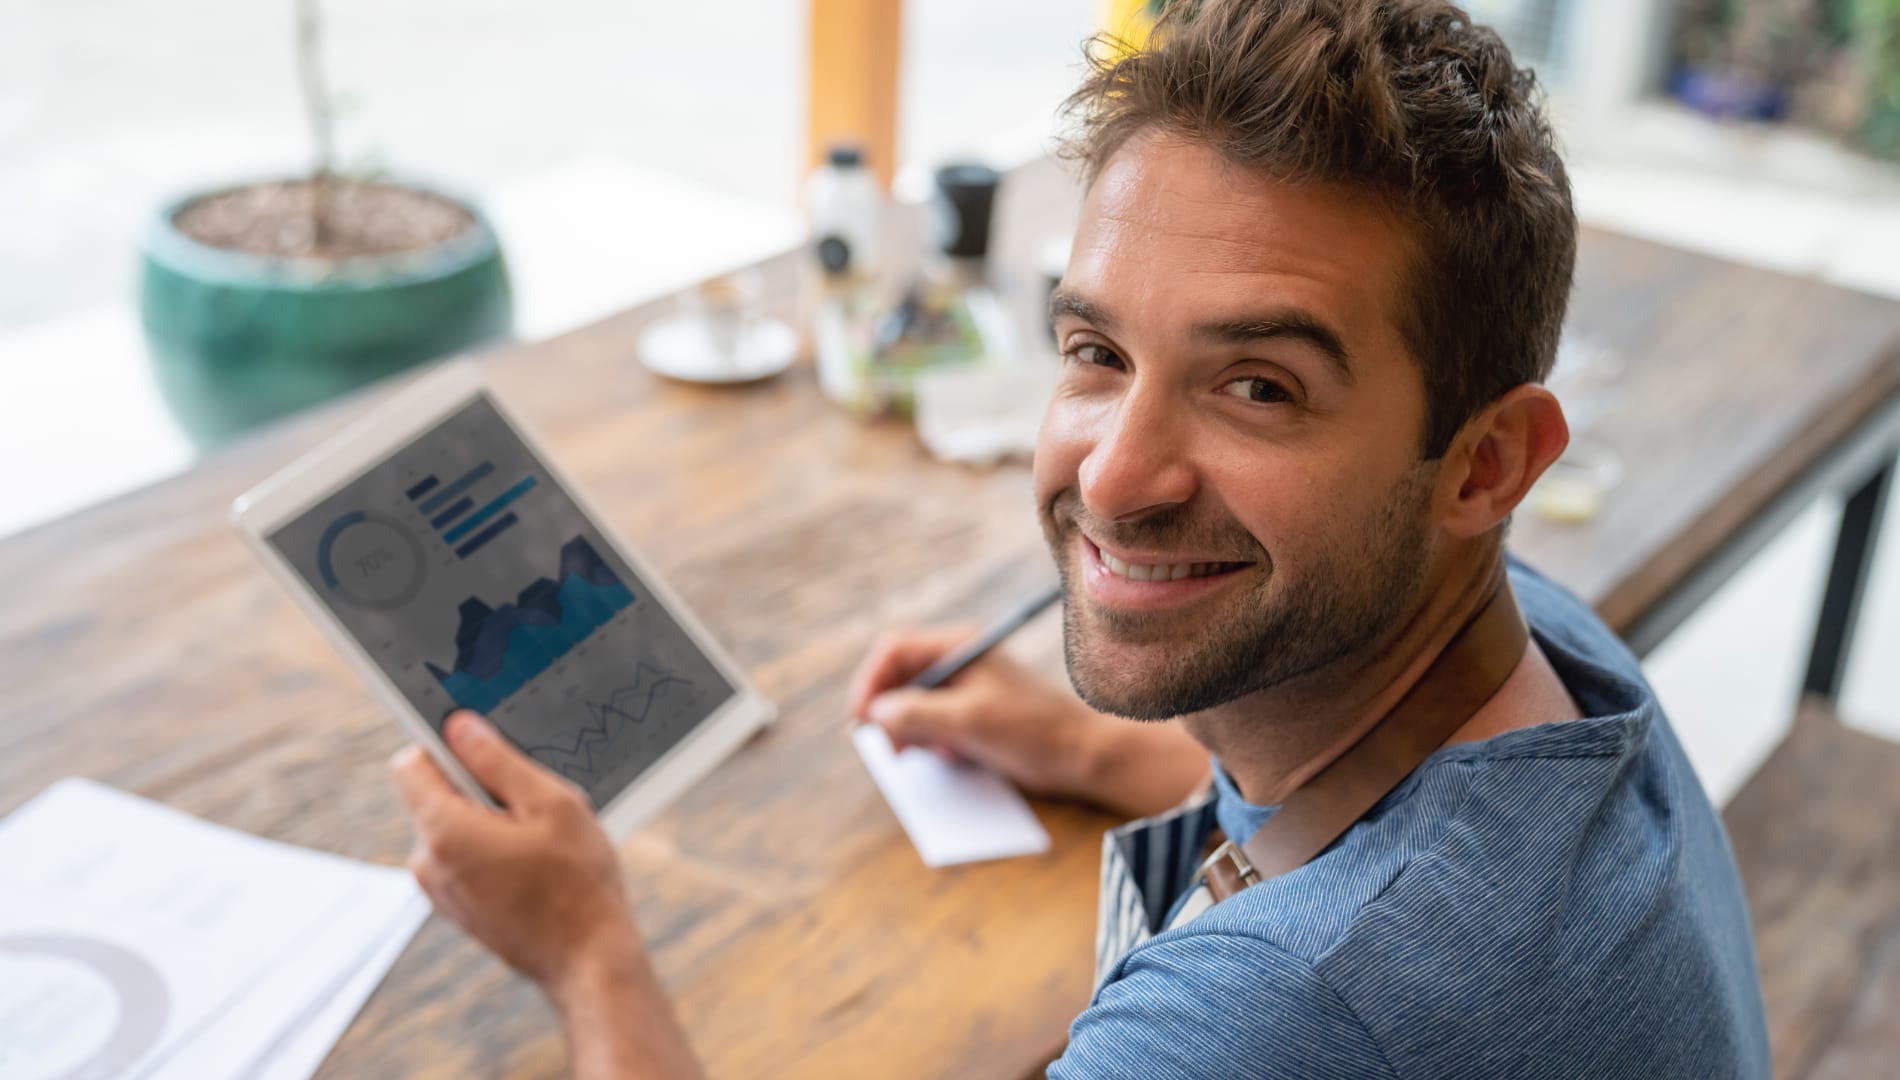 Man holding tablet looking over shoulder and smiling